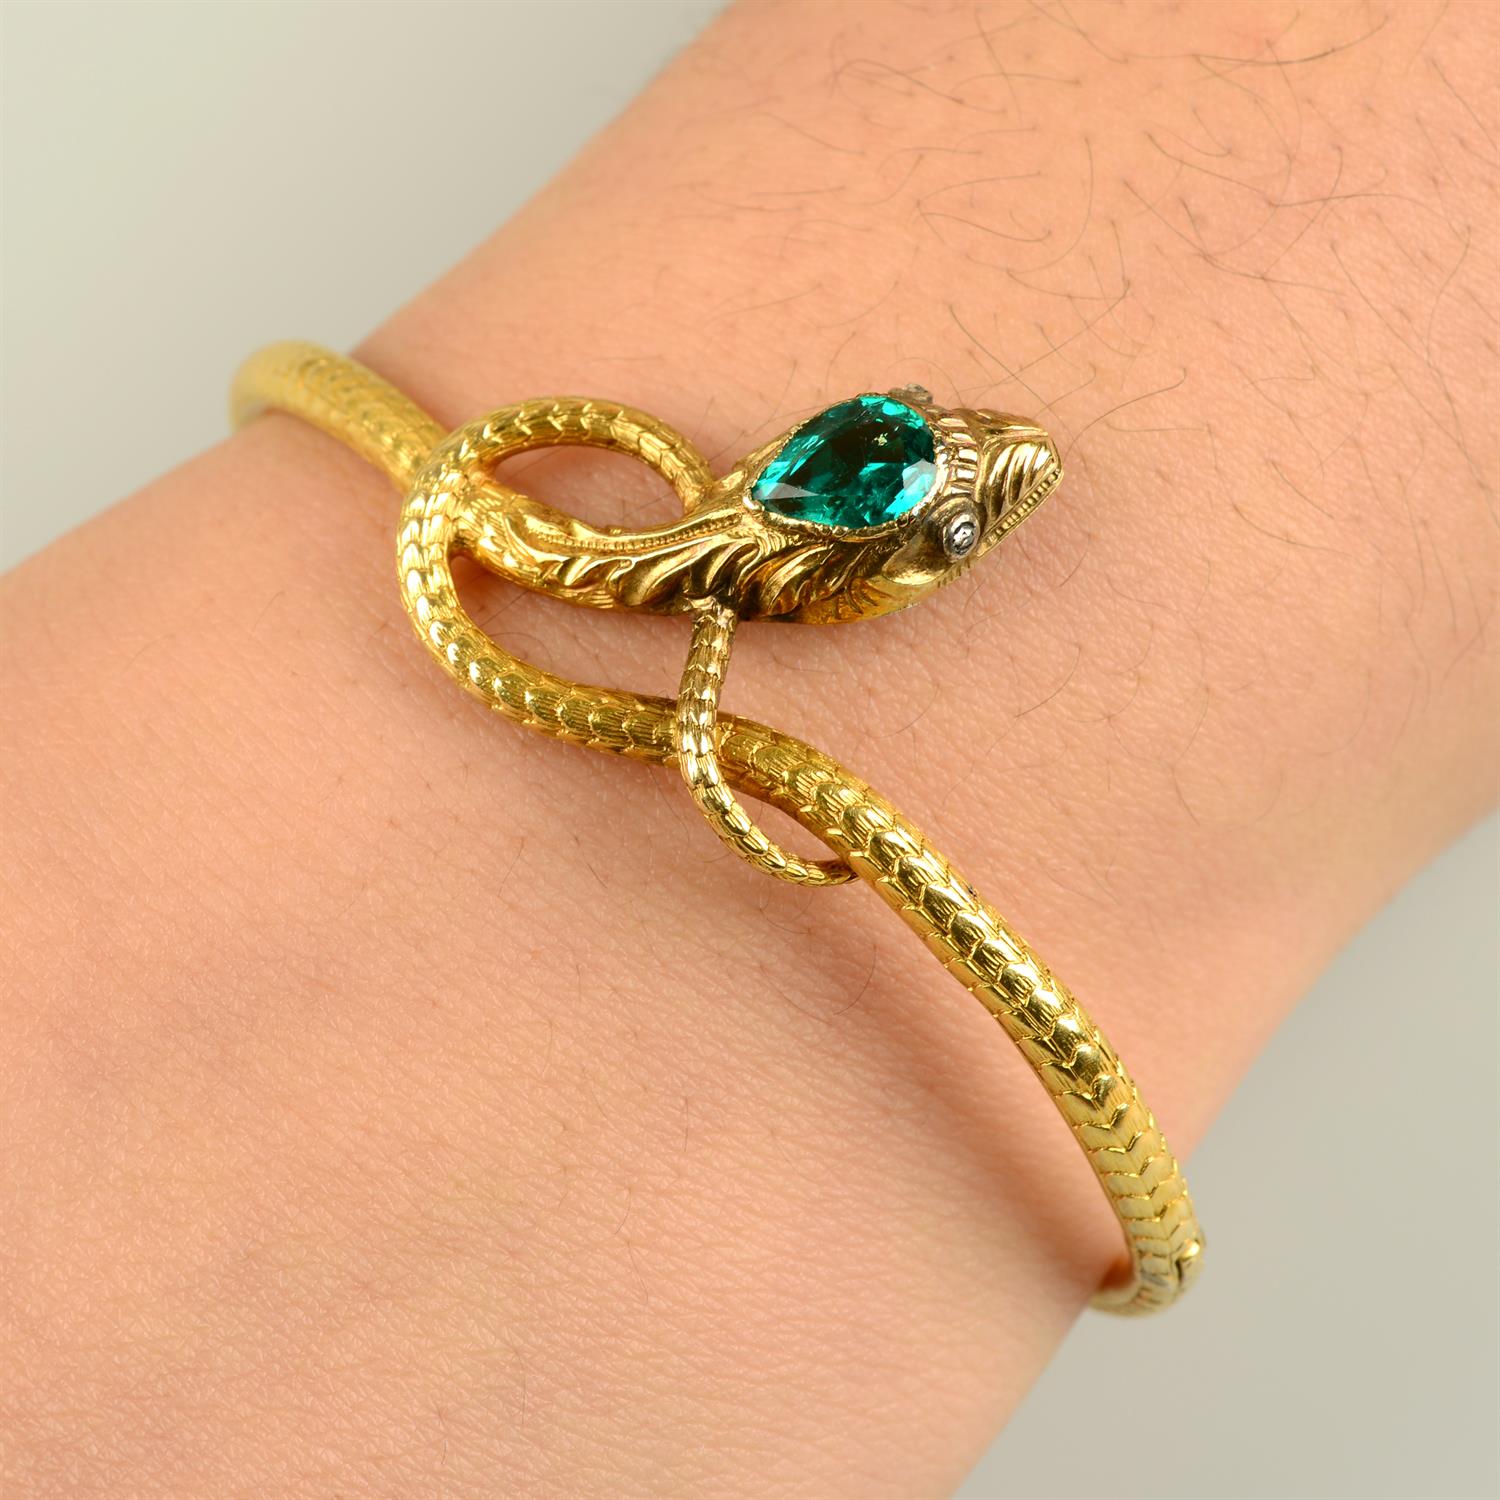 An early 19th century 18ct gold engraved snake bangle, with Colombian emerald crest and diamond